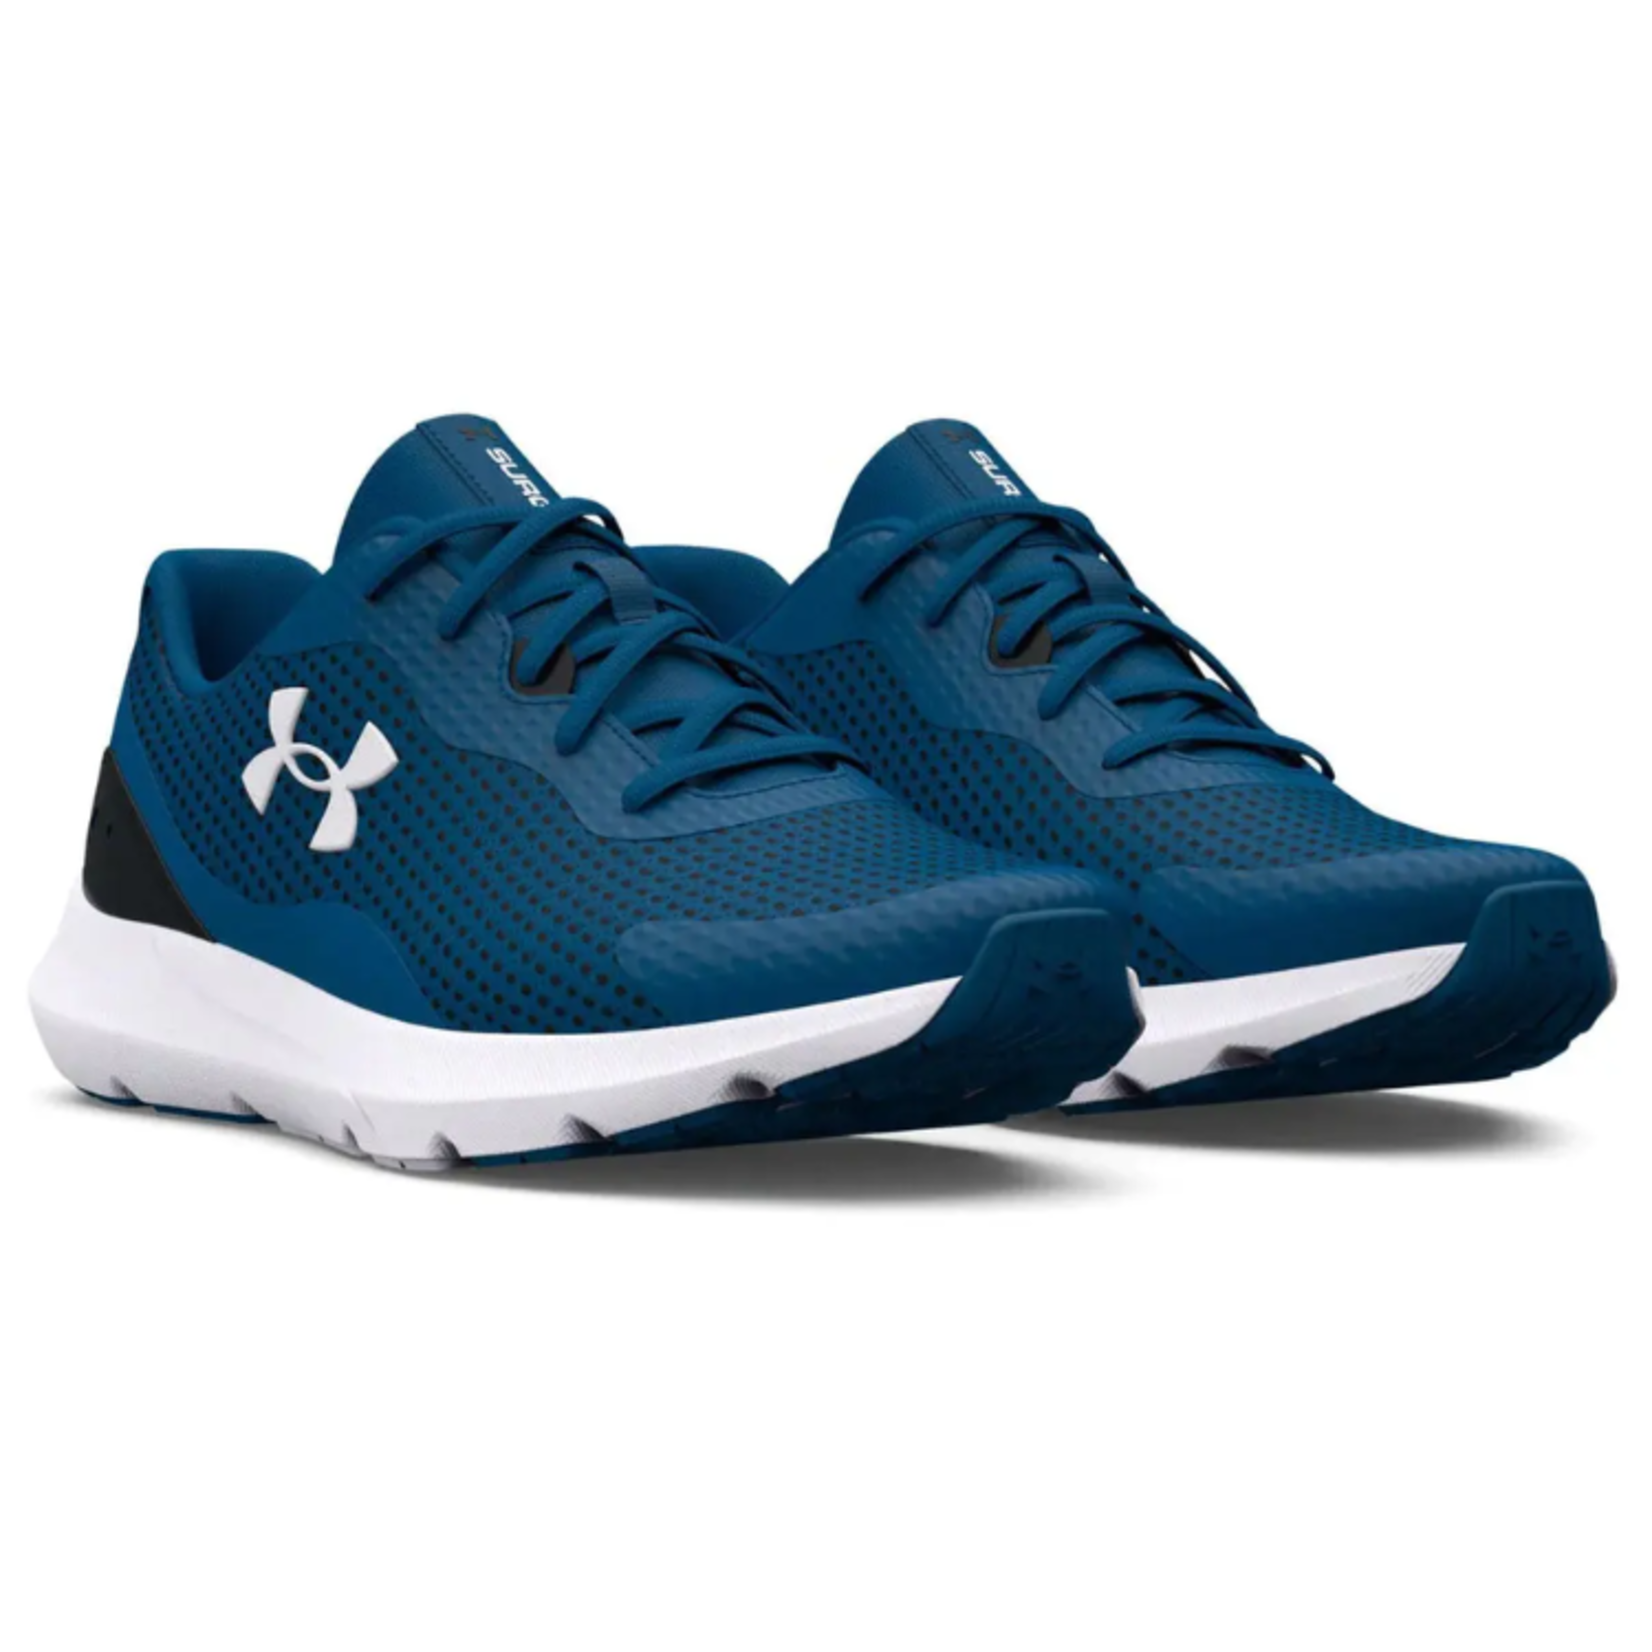 Under Armour Under Armour Running Shoes, Surge 3, Mens